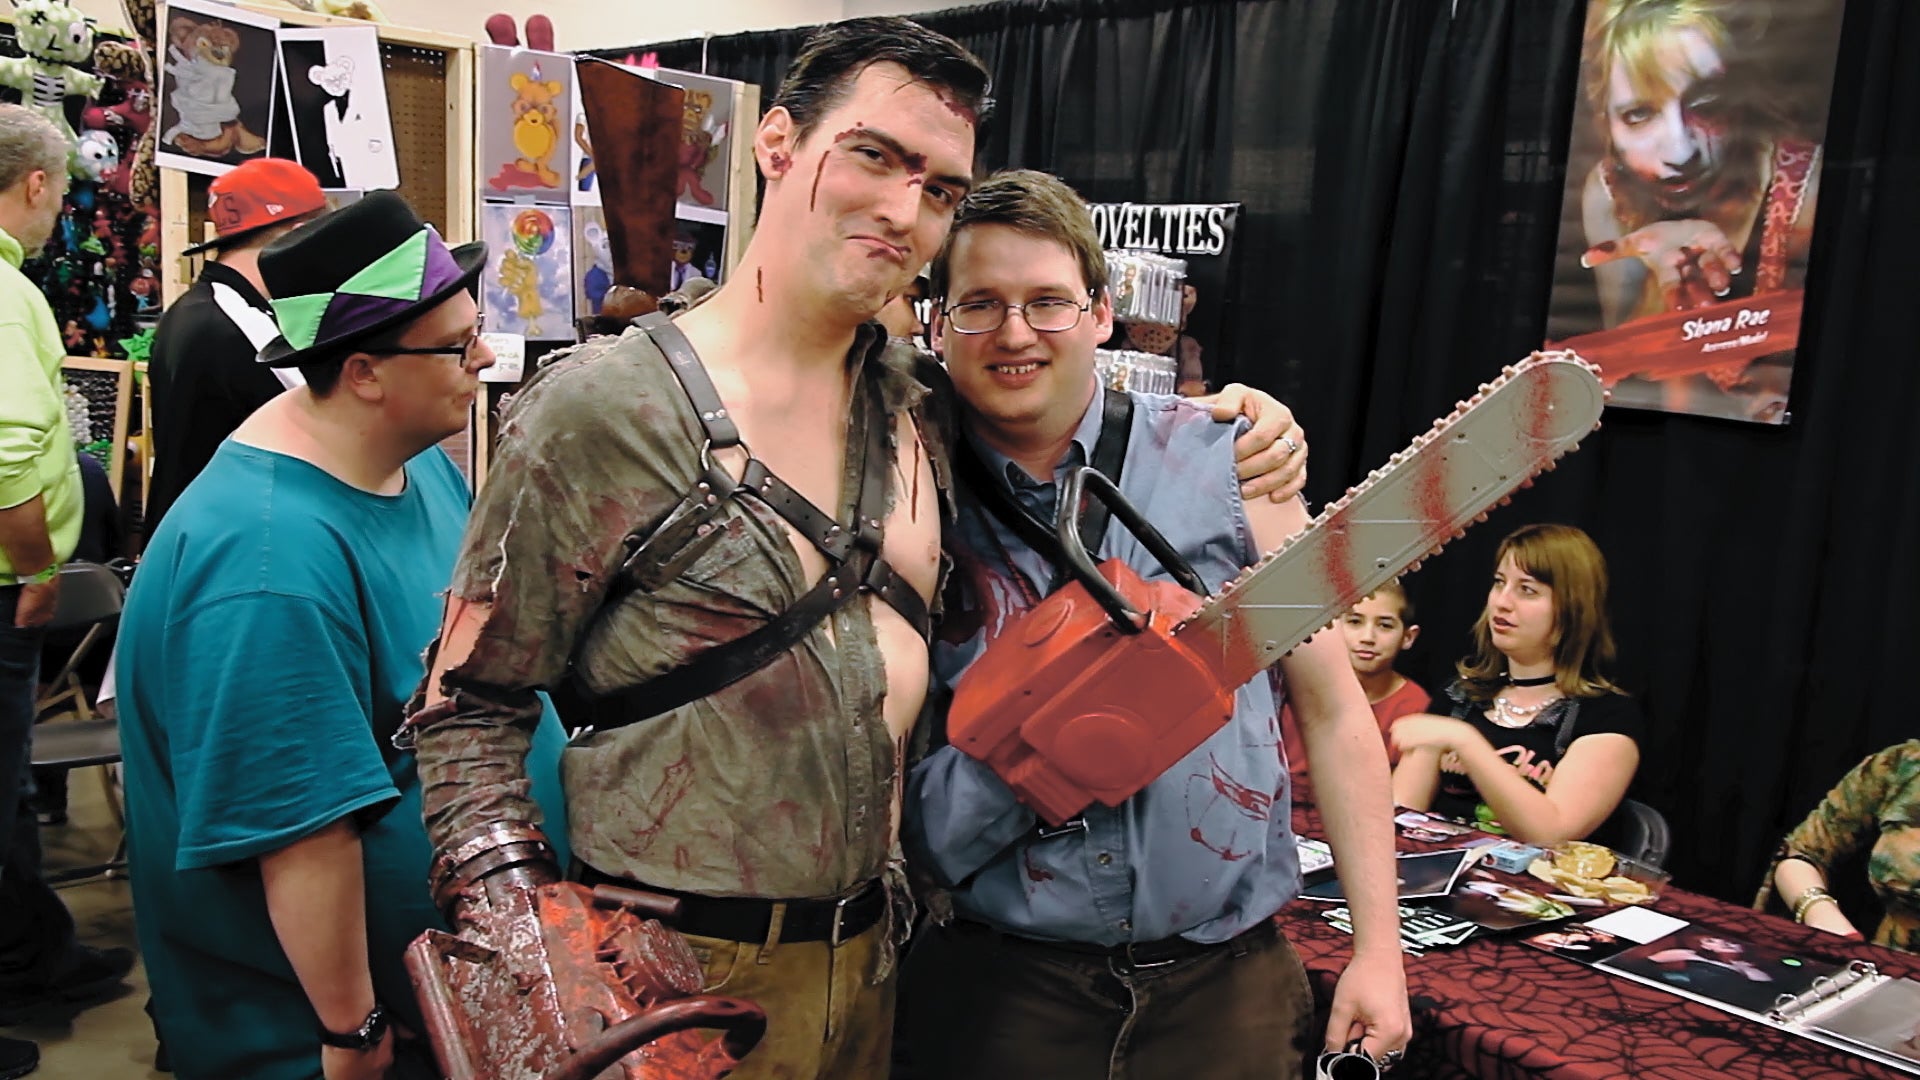 A cosplayer dressed as Ash poses with an admirer at a horror convention. (Image: Shout Studios)